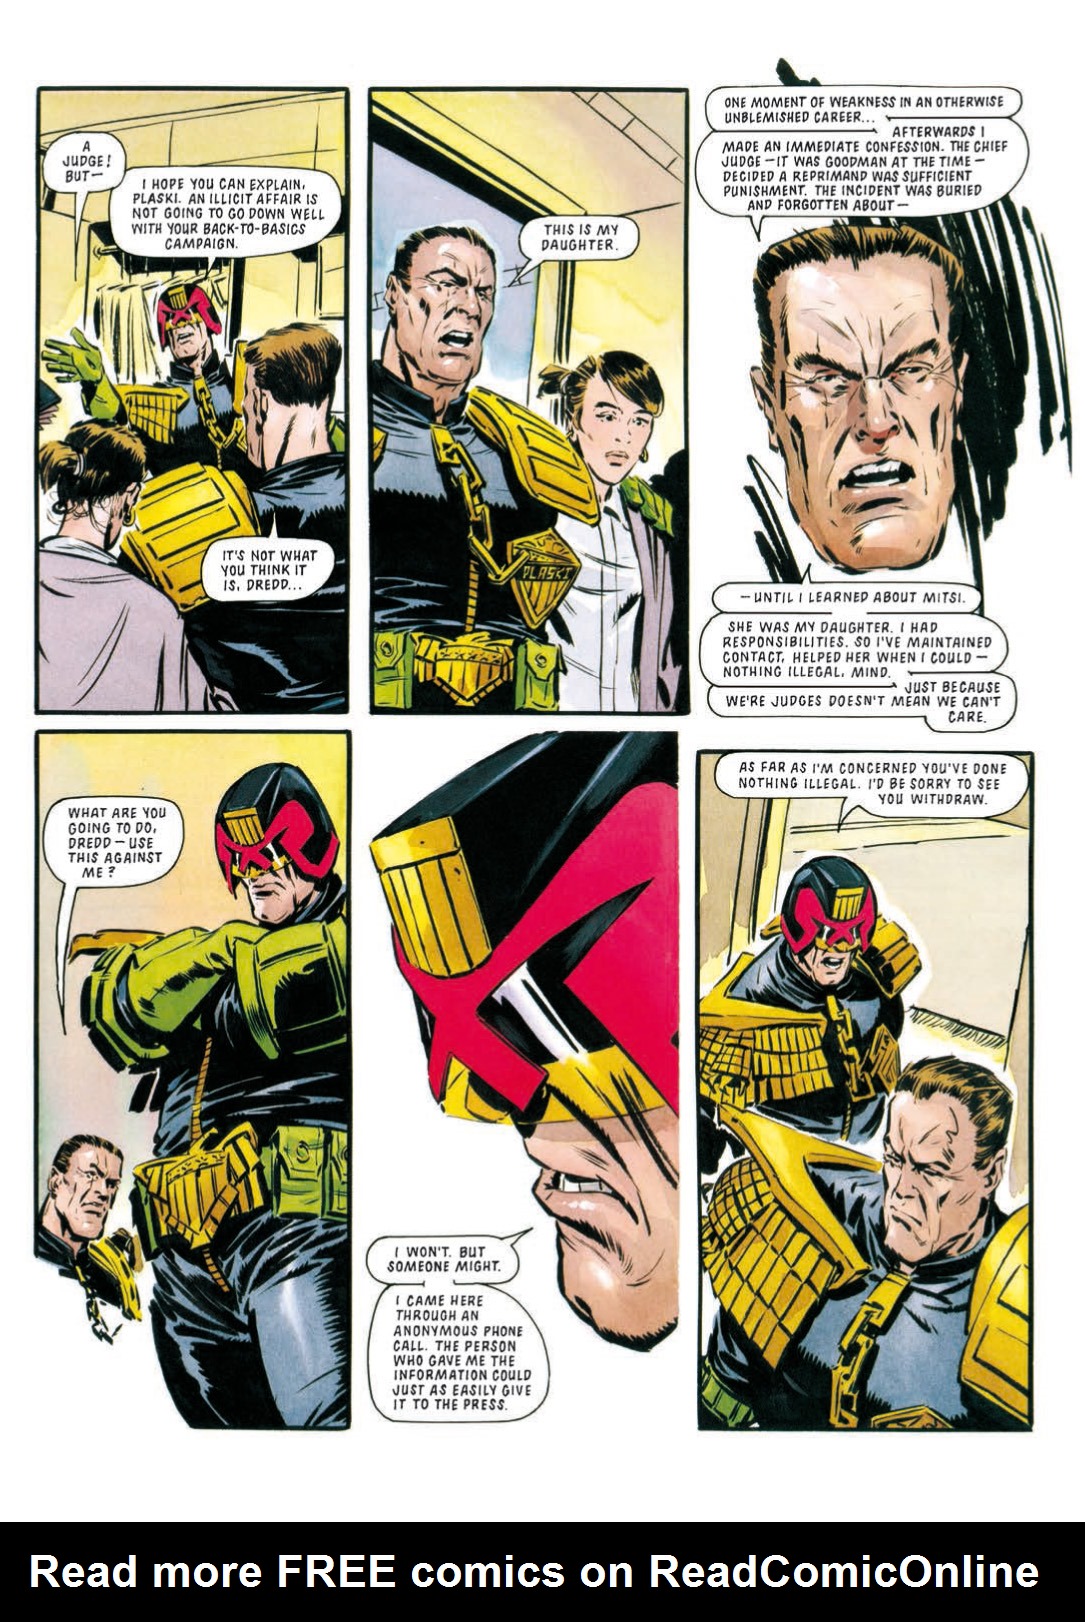 Read online Judge Dredd: The Complete Case Files comic -  Issue # TPB 22 - 12